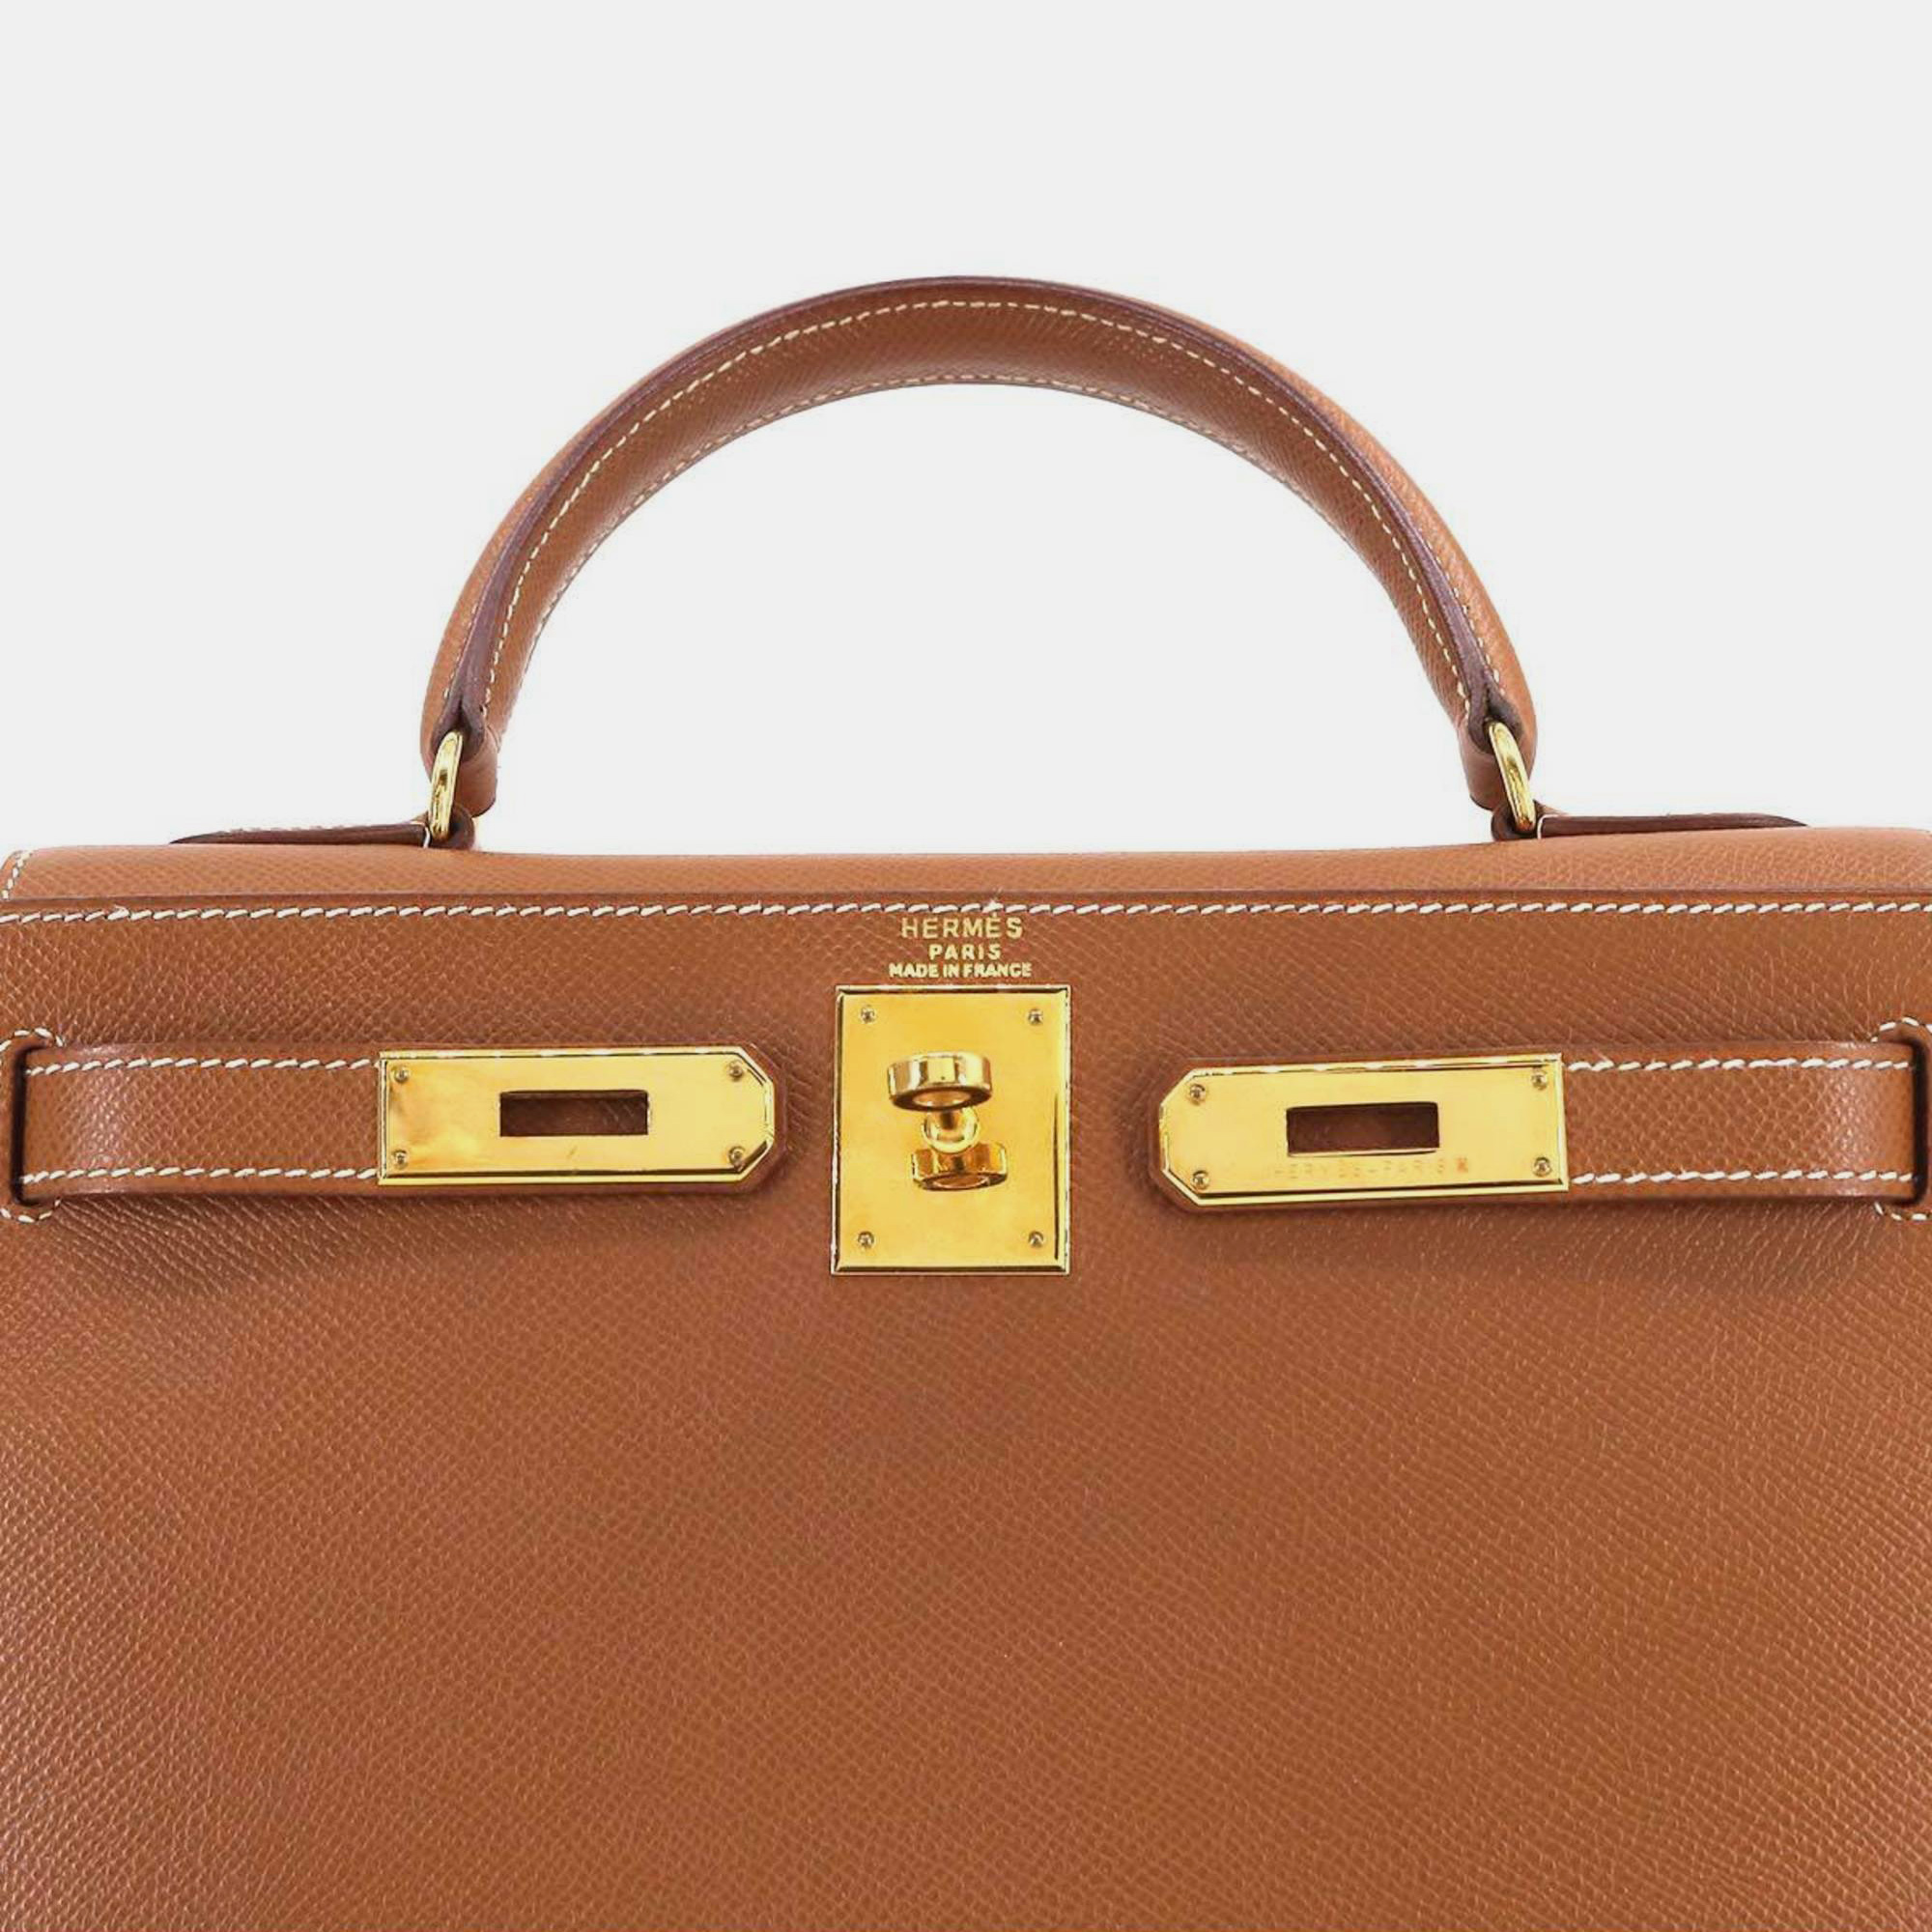 HERMES Kelly 28 2way Hand Shoulder Bag Couchevel Epson Gold Outside Stitching Z Engraved Hardware